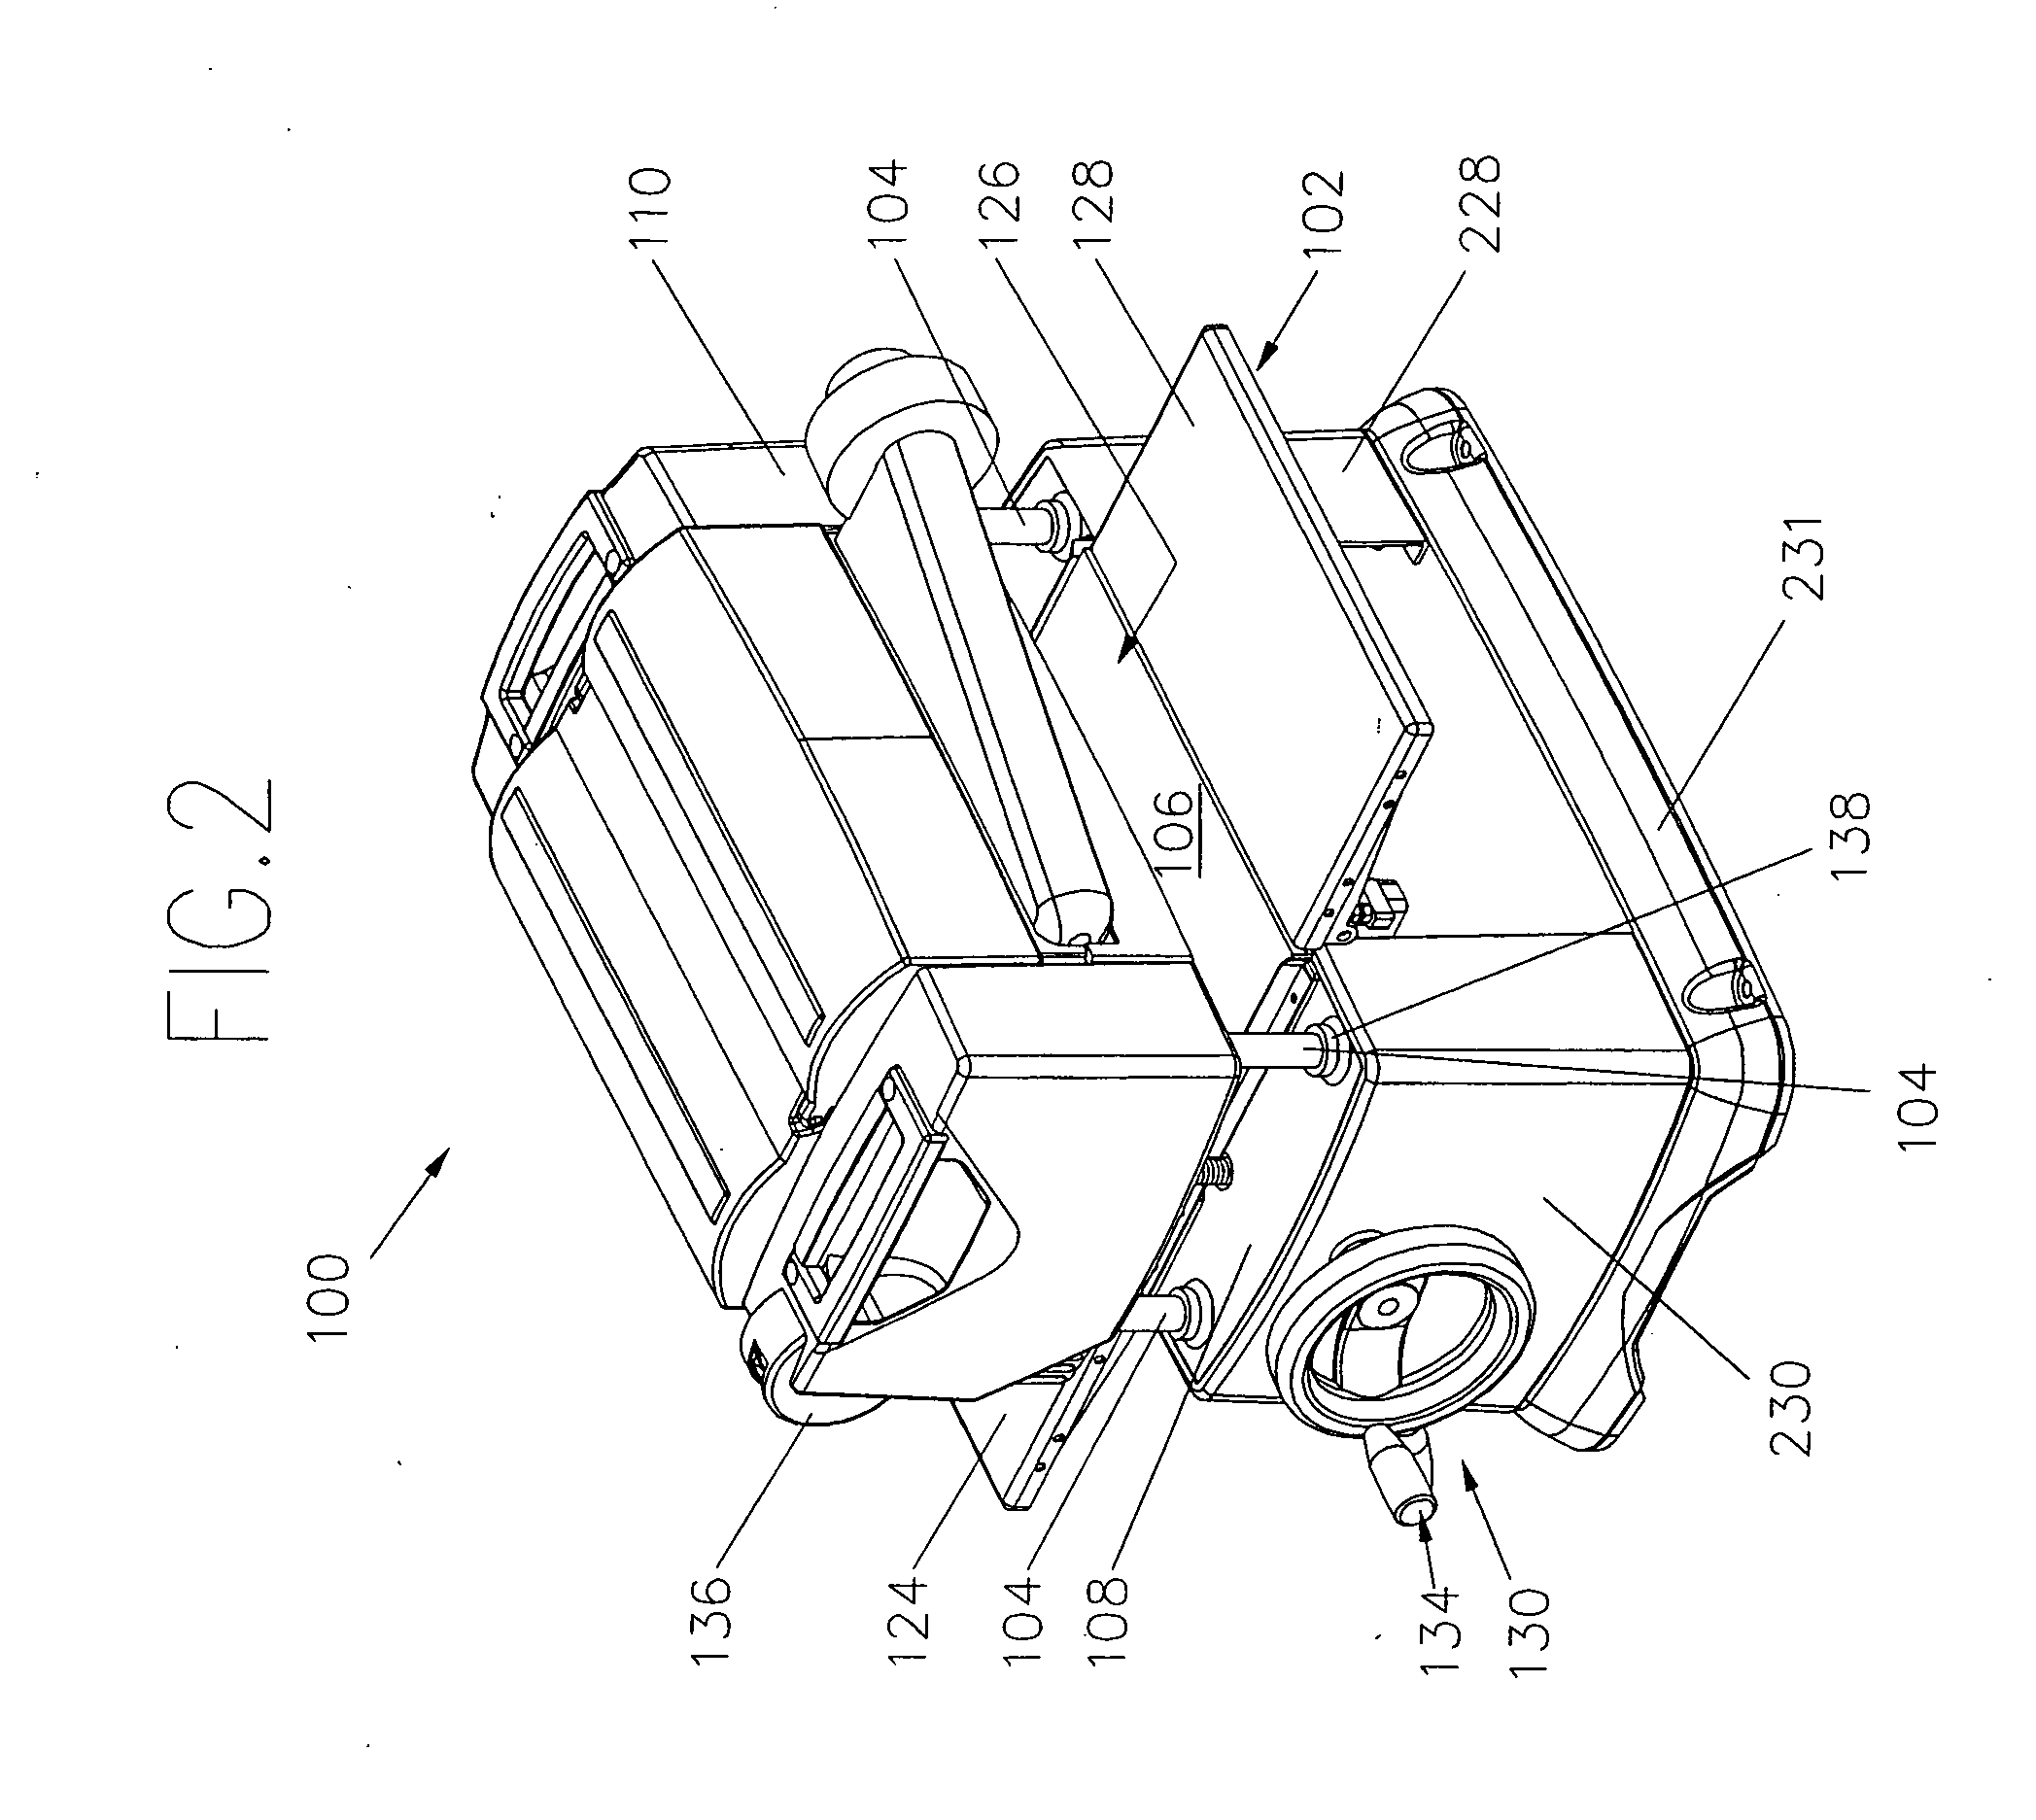 Planer with carriage locking mechanism